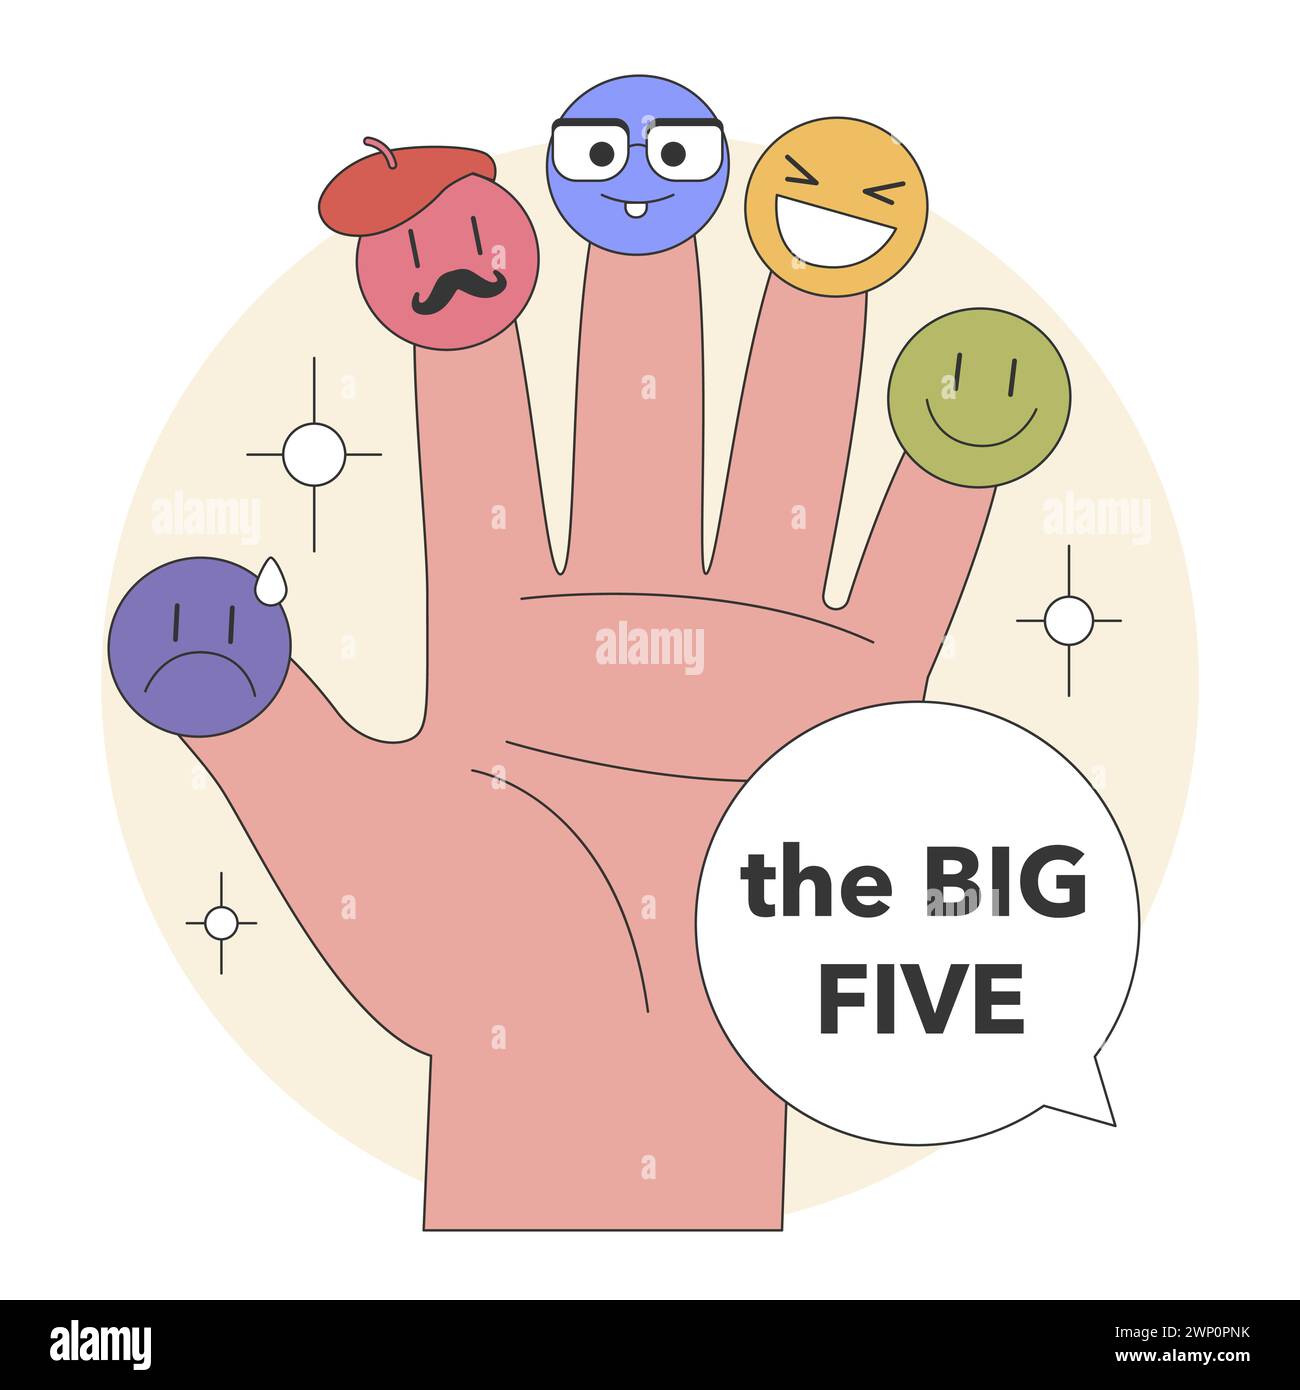 The Big Five Personality Traits conceptualized as emotive finger puppets. Human hand representing different emotions and characteristics. Flat vector illustration. Stock Vector